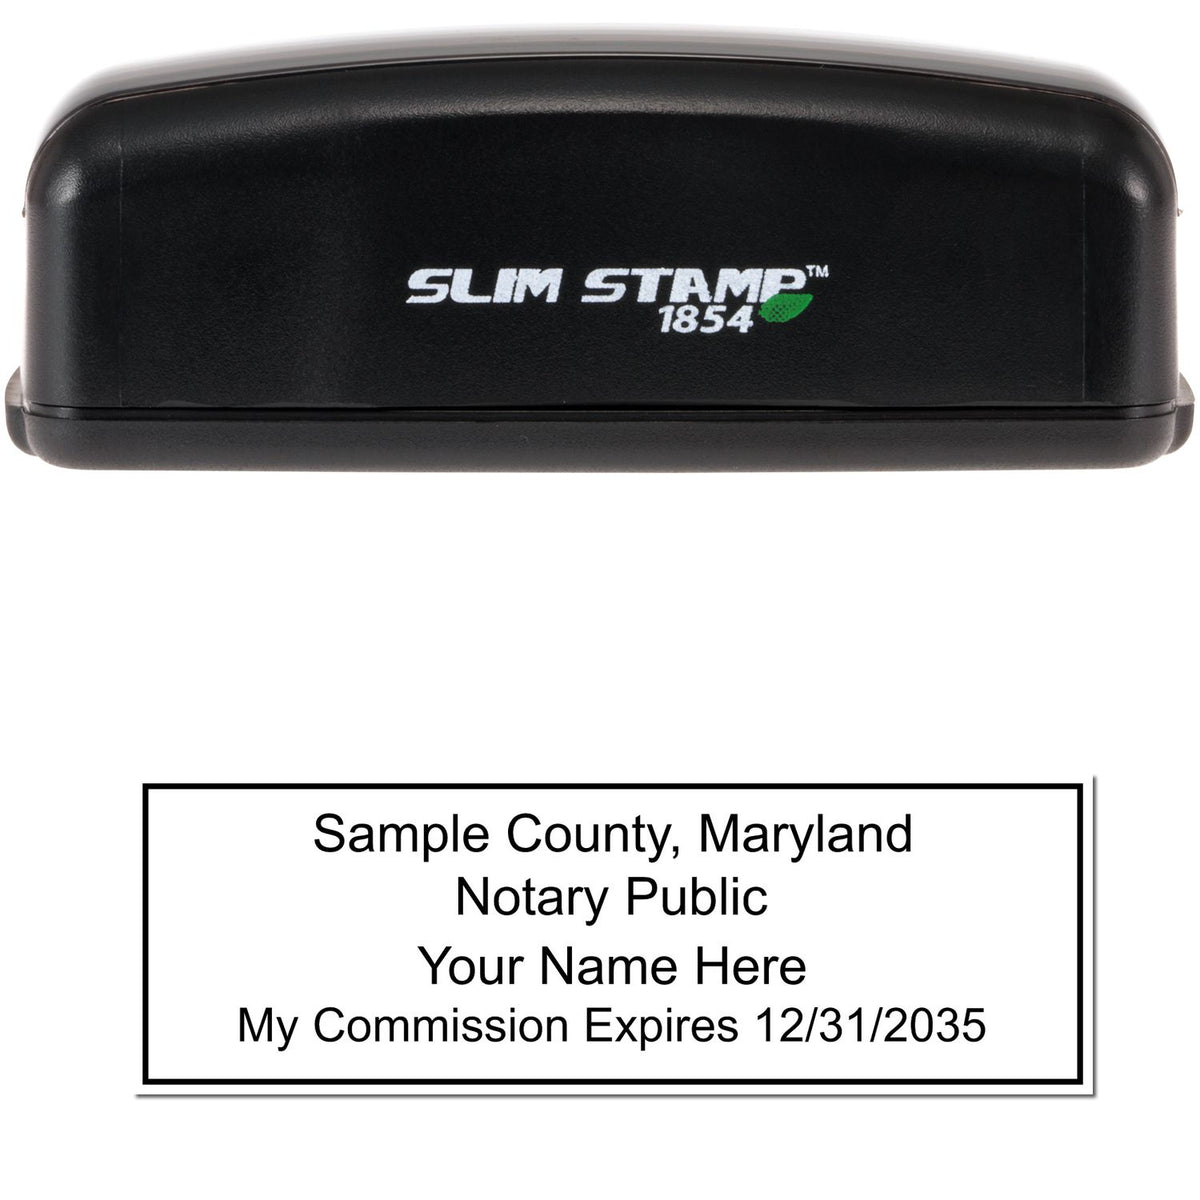 The main image for the Slim Pre-Inked Rectangular Notary Stamp for Maryland depicting a sample of the imprint and electronic files